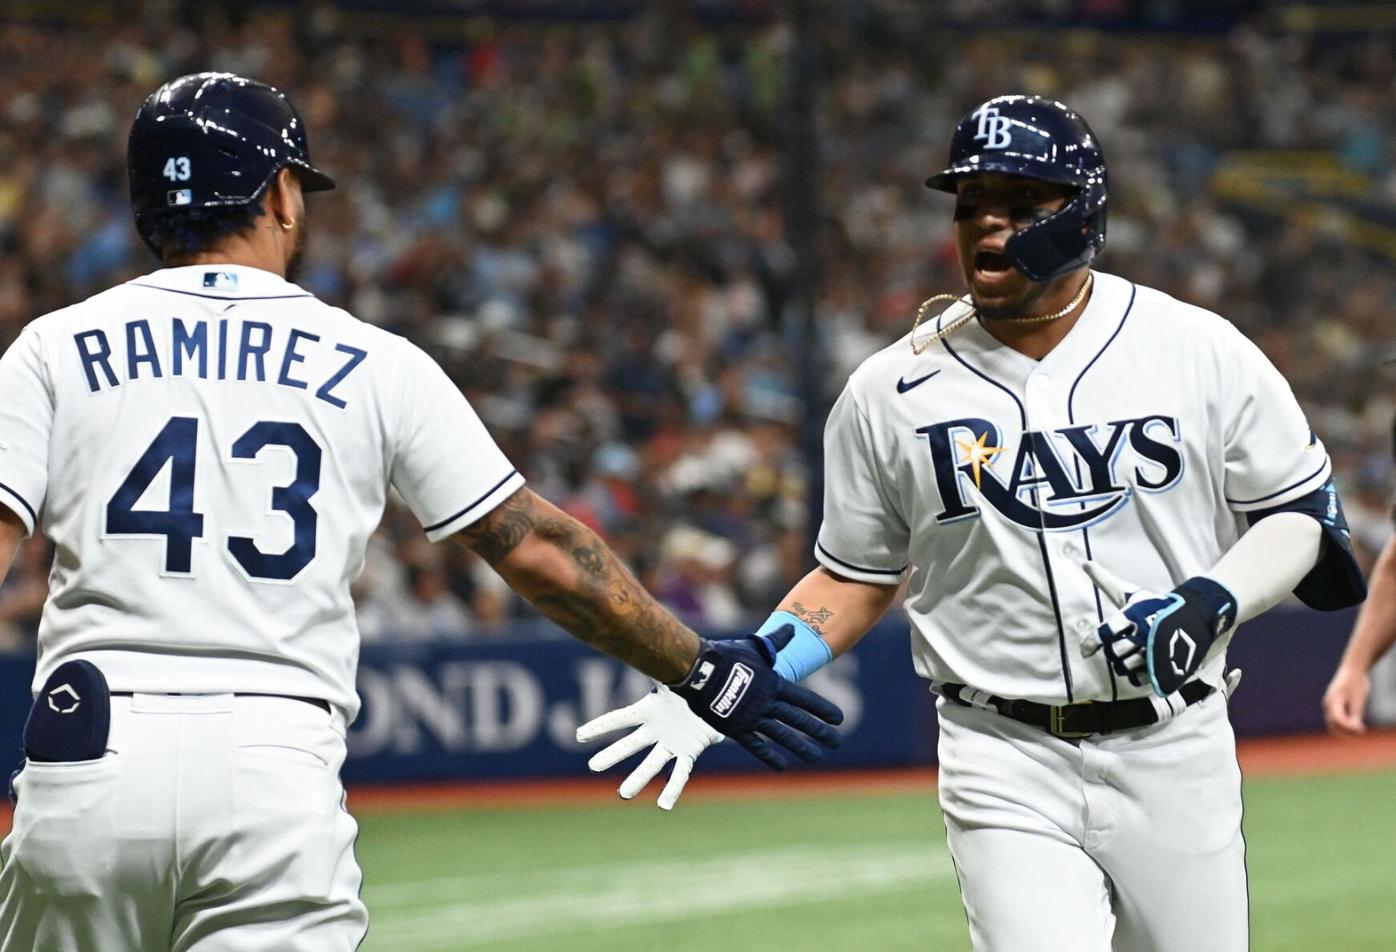 Tampa Bay Rays: Isaac Paredes smashes two homers against Detroit Tigers